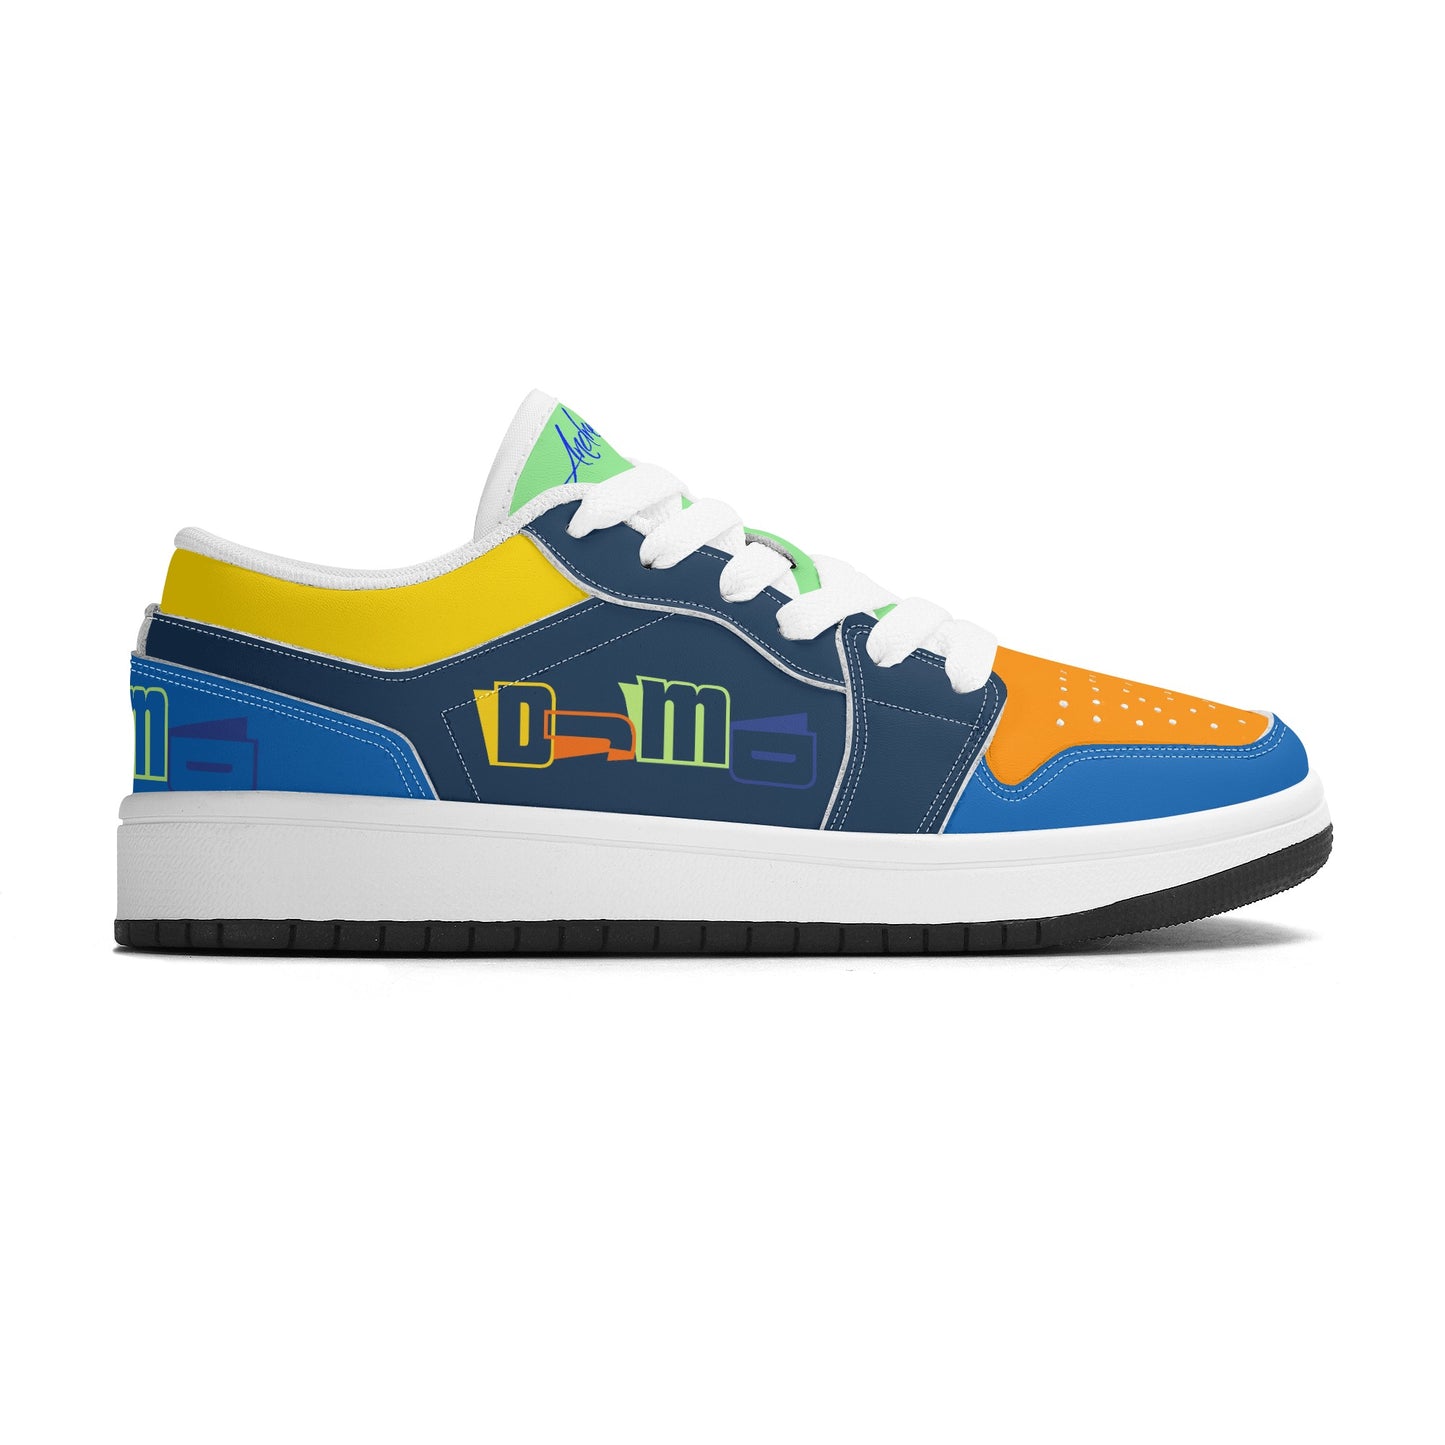 DJMD Childrens Low Top Leather Sneakers